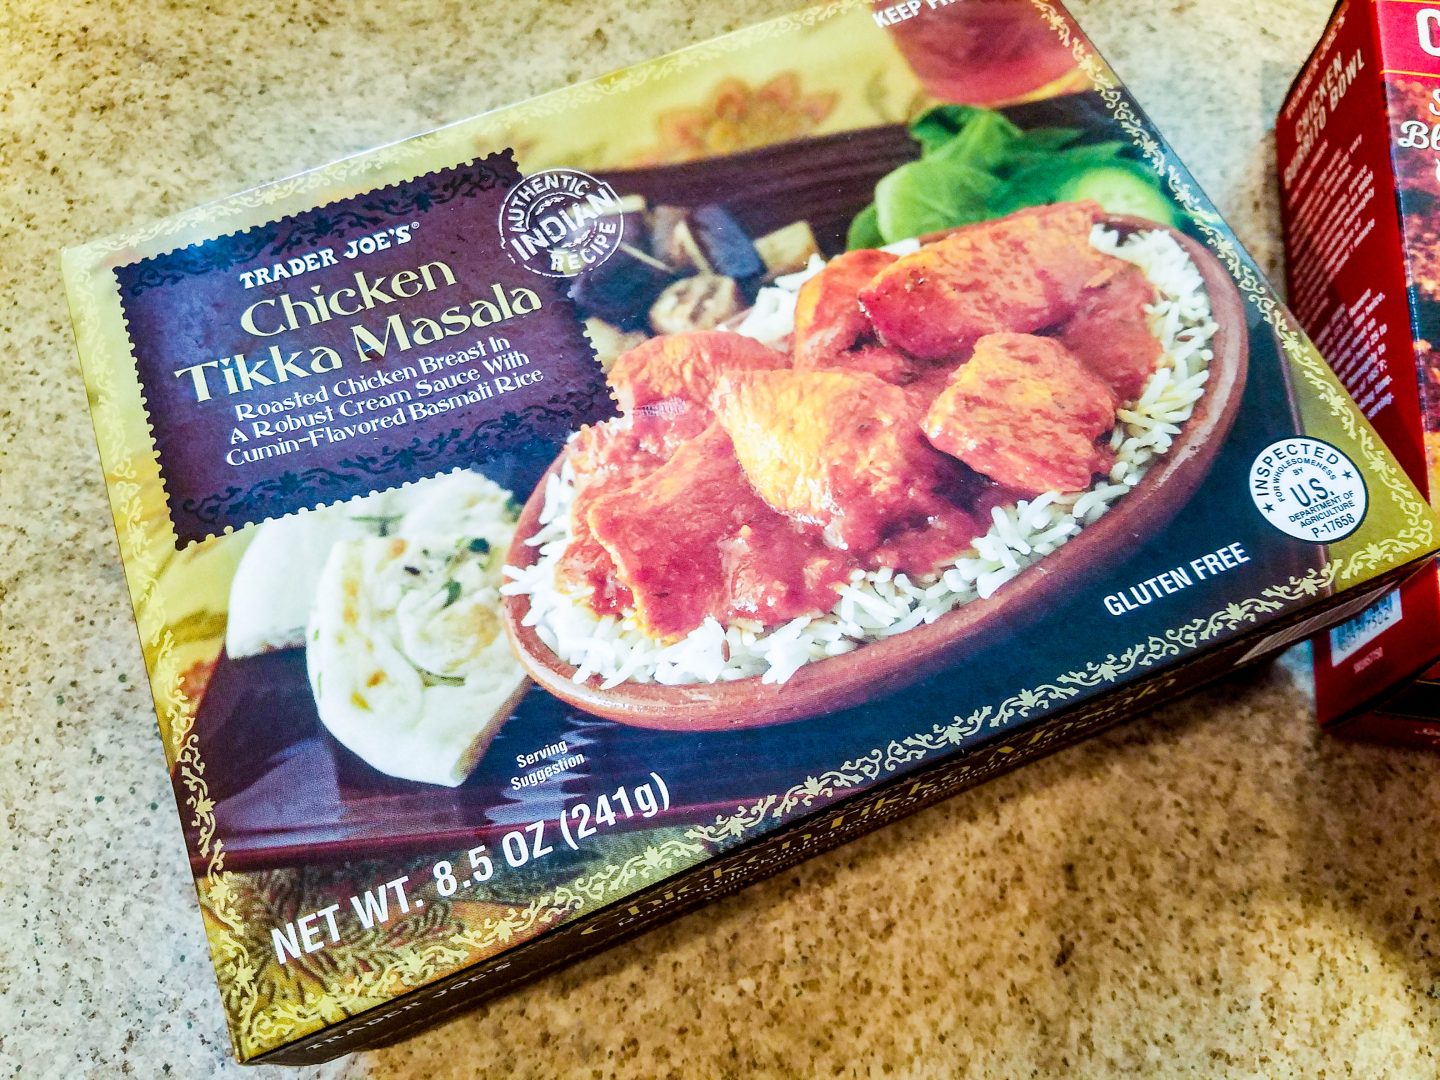 I went to Trader Joe's on a whim last week and picked up some great frozen meals, healthy(ish!) snacks, and some new wine to try!